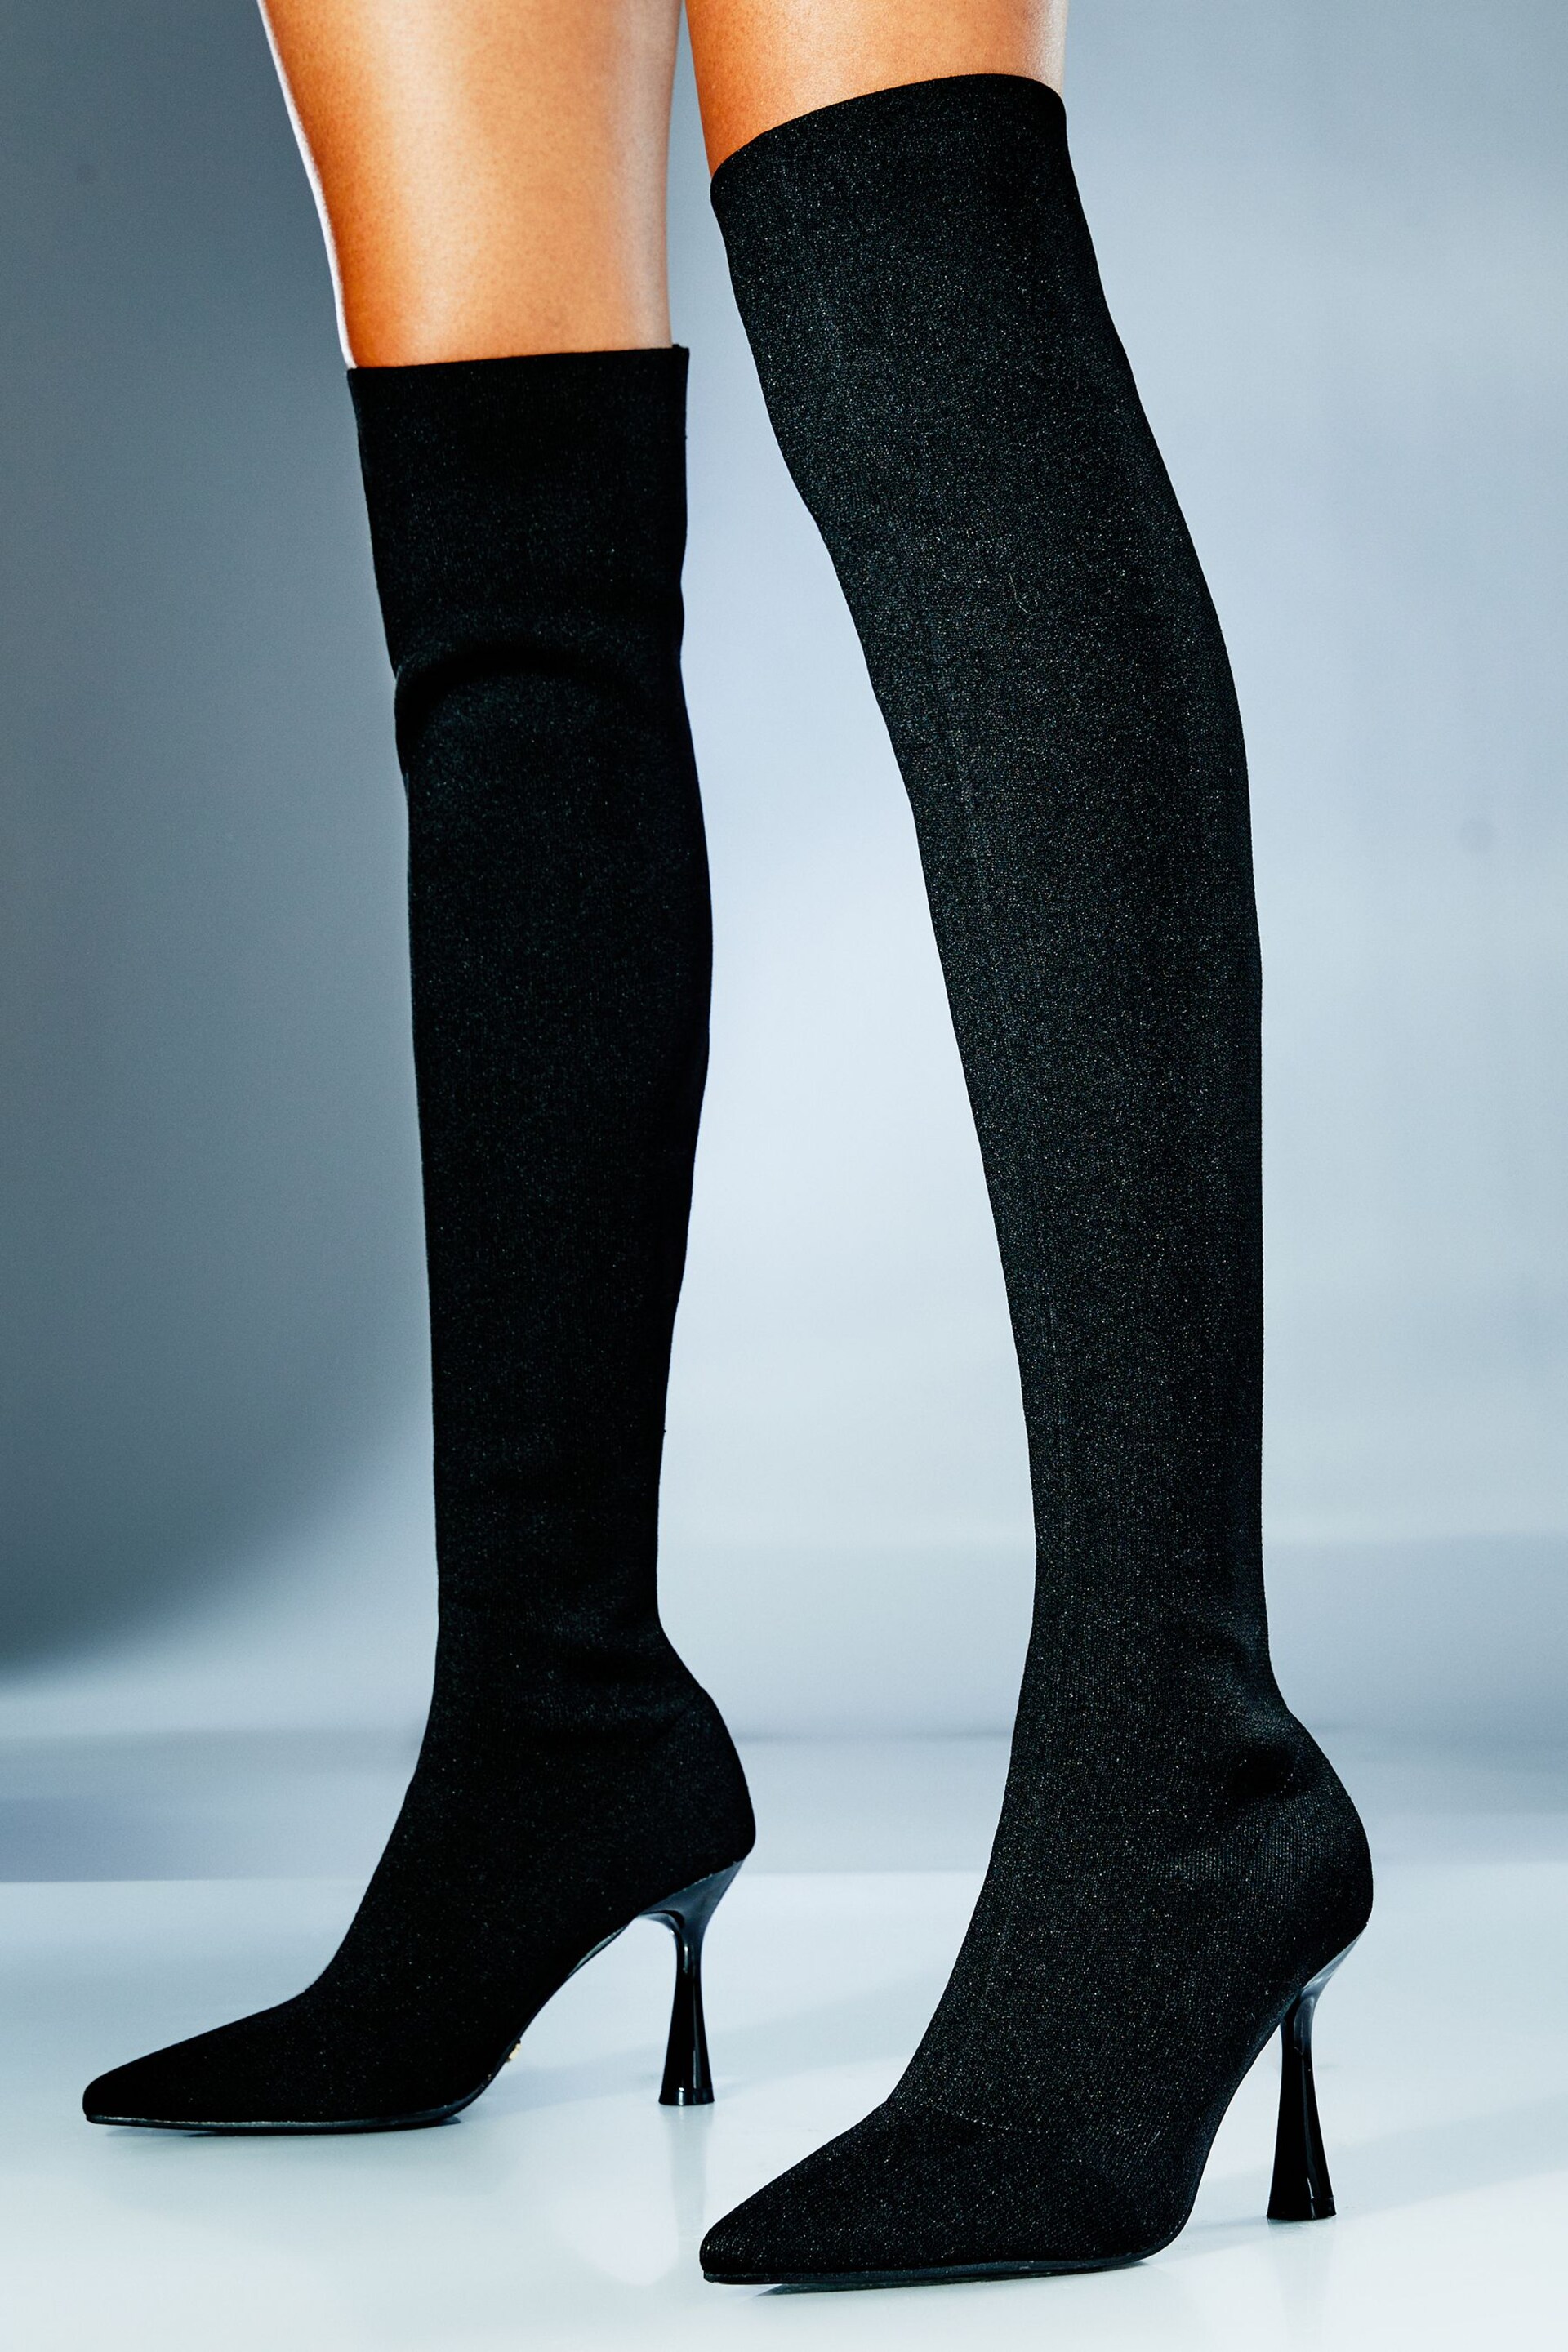 Lipsy Black Regular Fit Mid Heel Over The Knee Knitted Sock Boot - Image 2 of 5